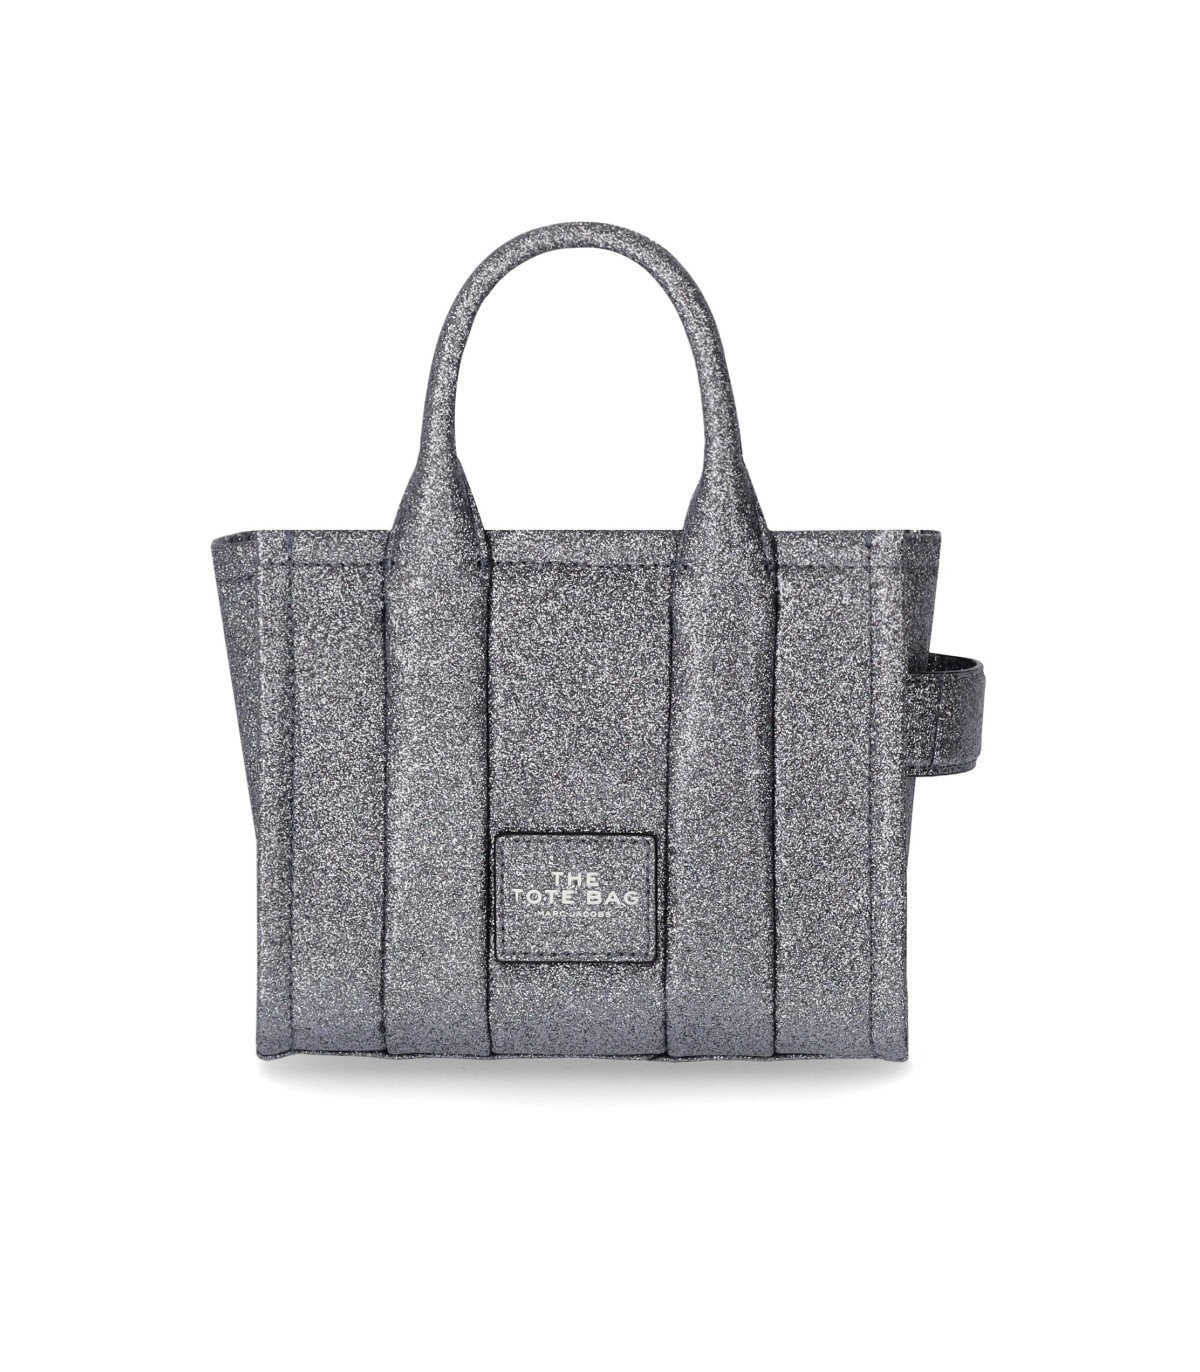 MARC JACOBS THE GALACTIC GLITTER MINI TOTE SILVER BAG